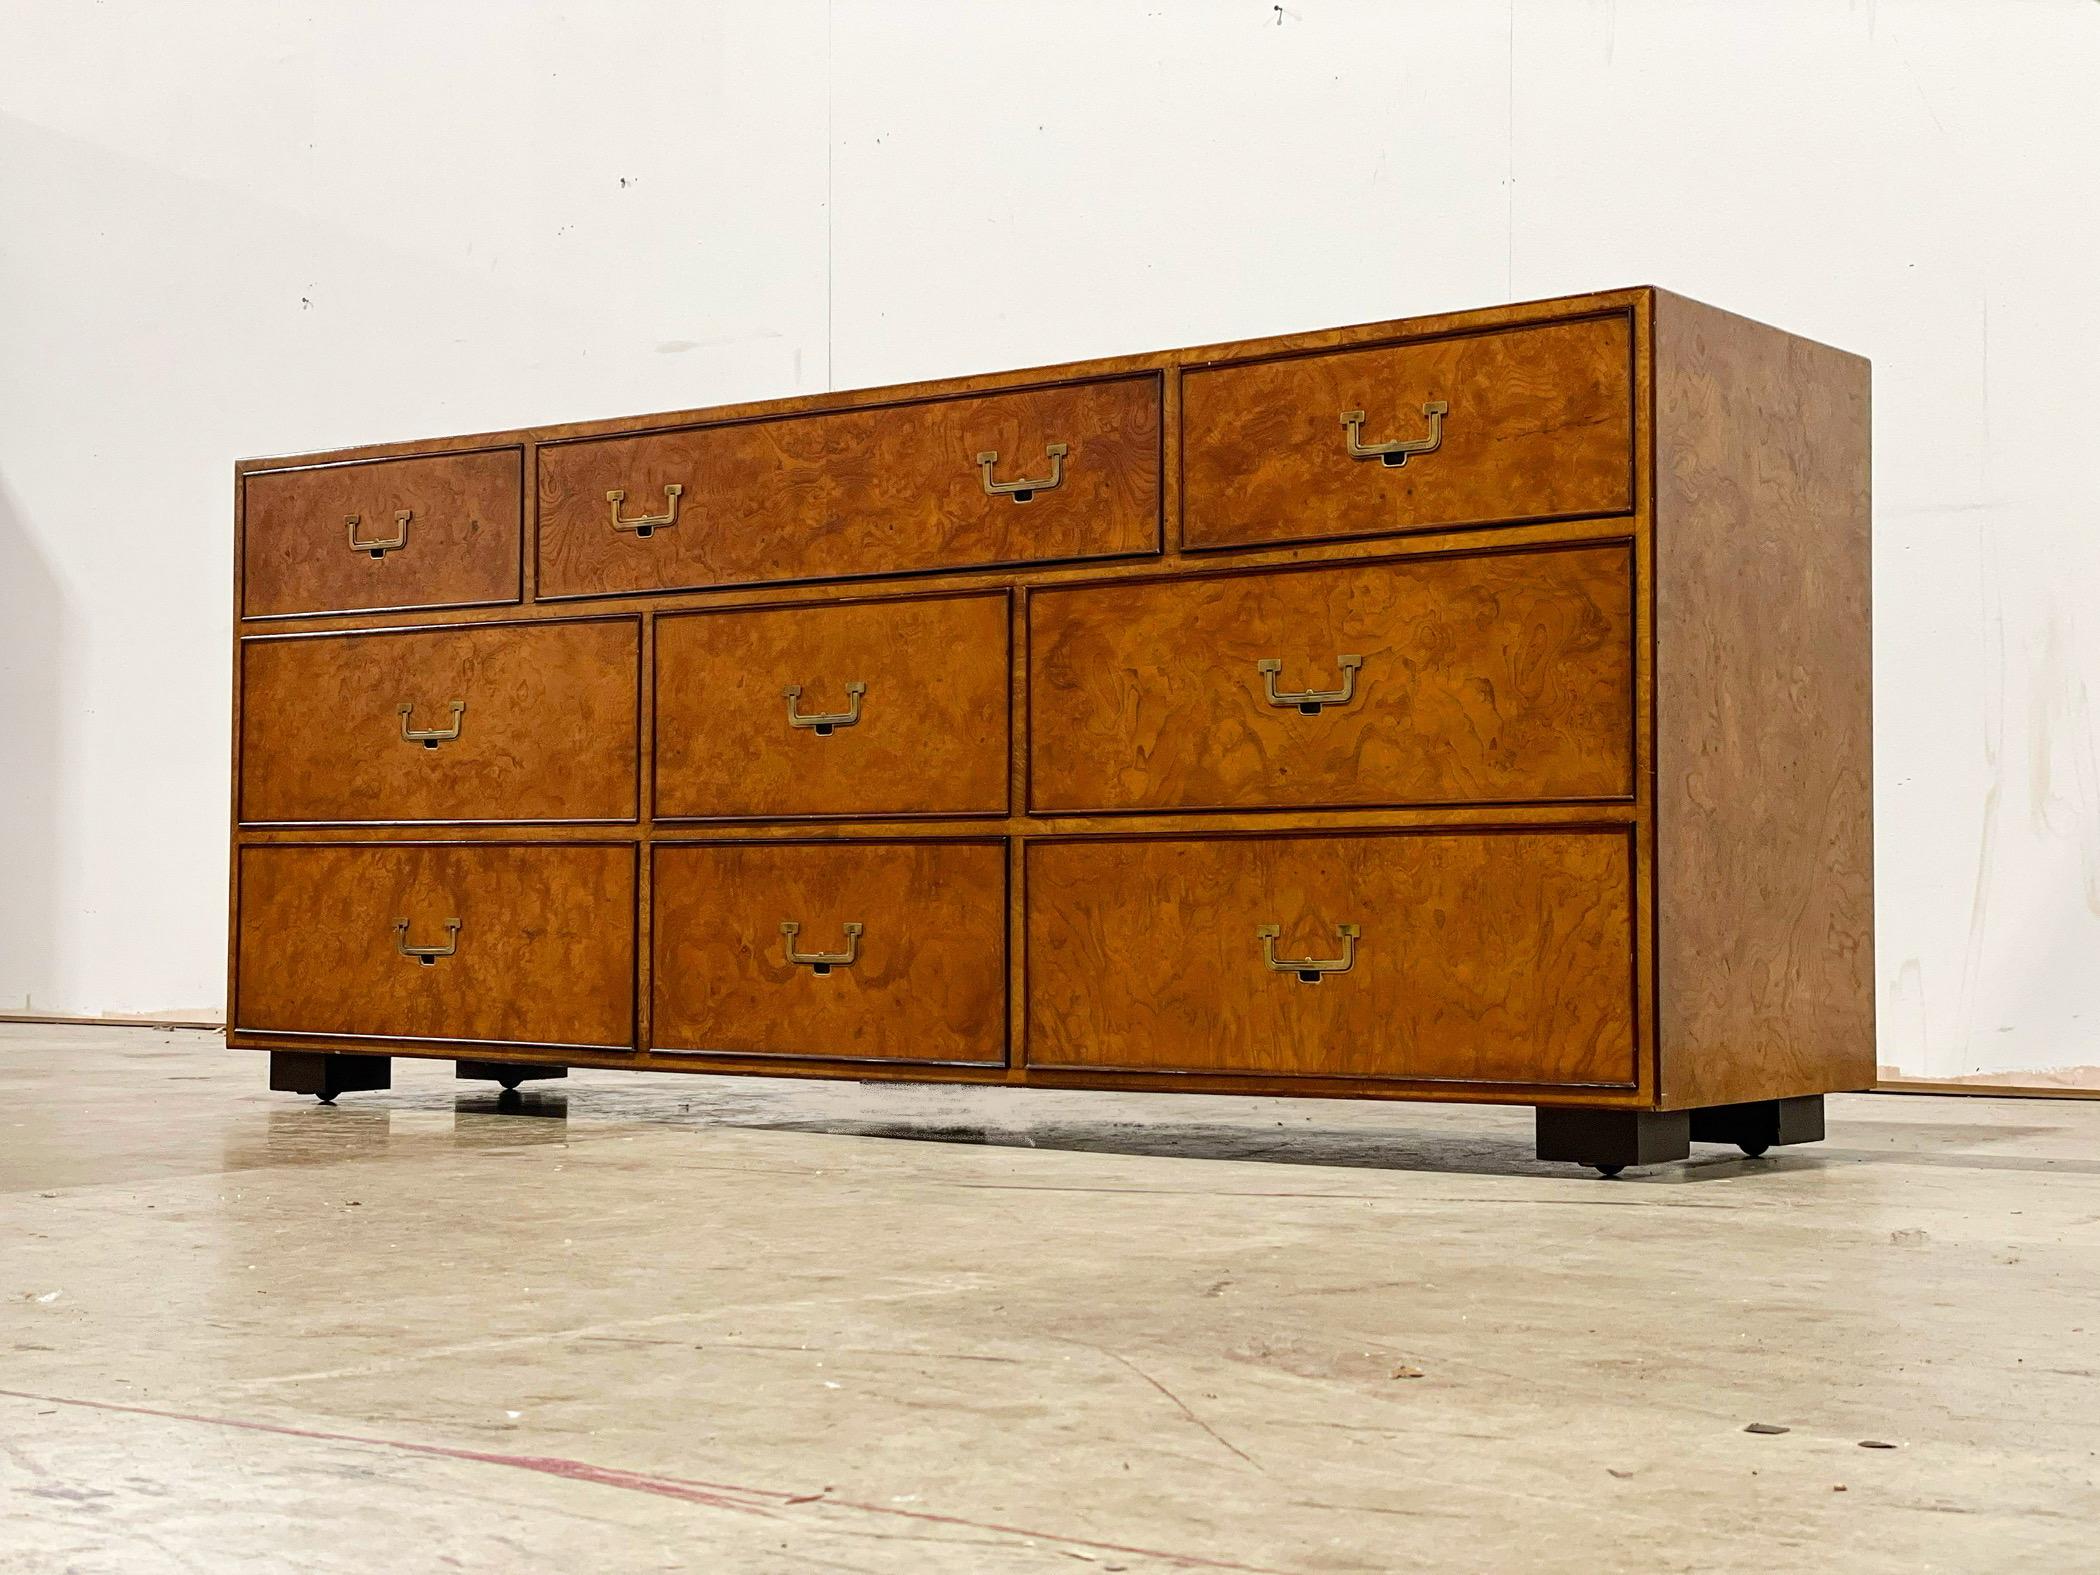 Rare nine drawer burled olivewood campaign dresser by John Widdicomb. Classic and timeless design with unparalleled American craftsmanship. 
Recessed ebonized legs have built in casters.
Excellent original condition, looks to have been hardly, if